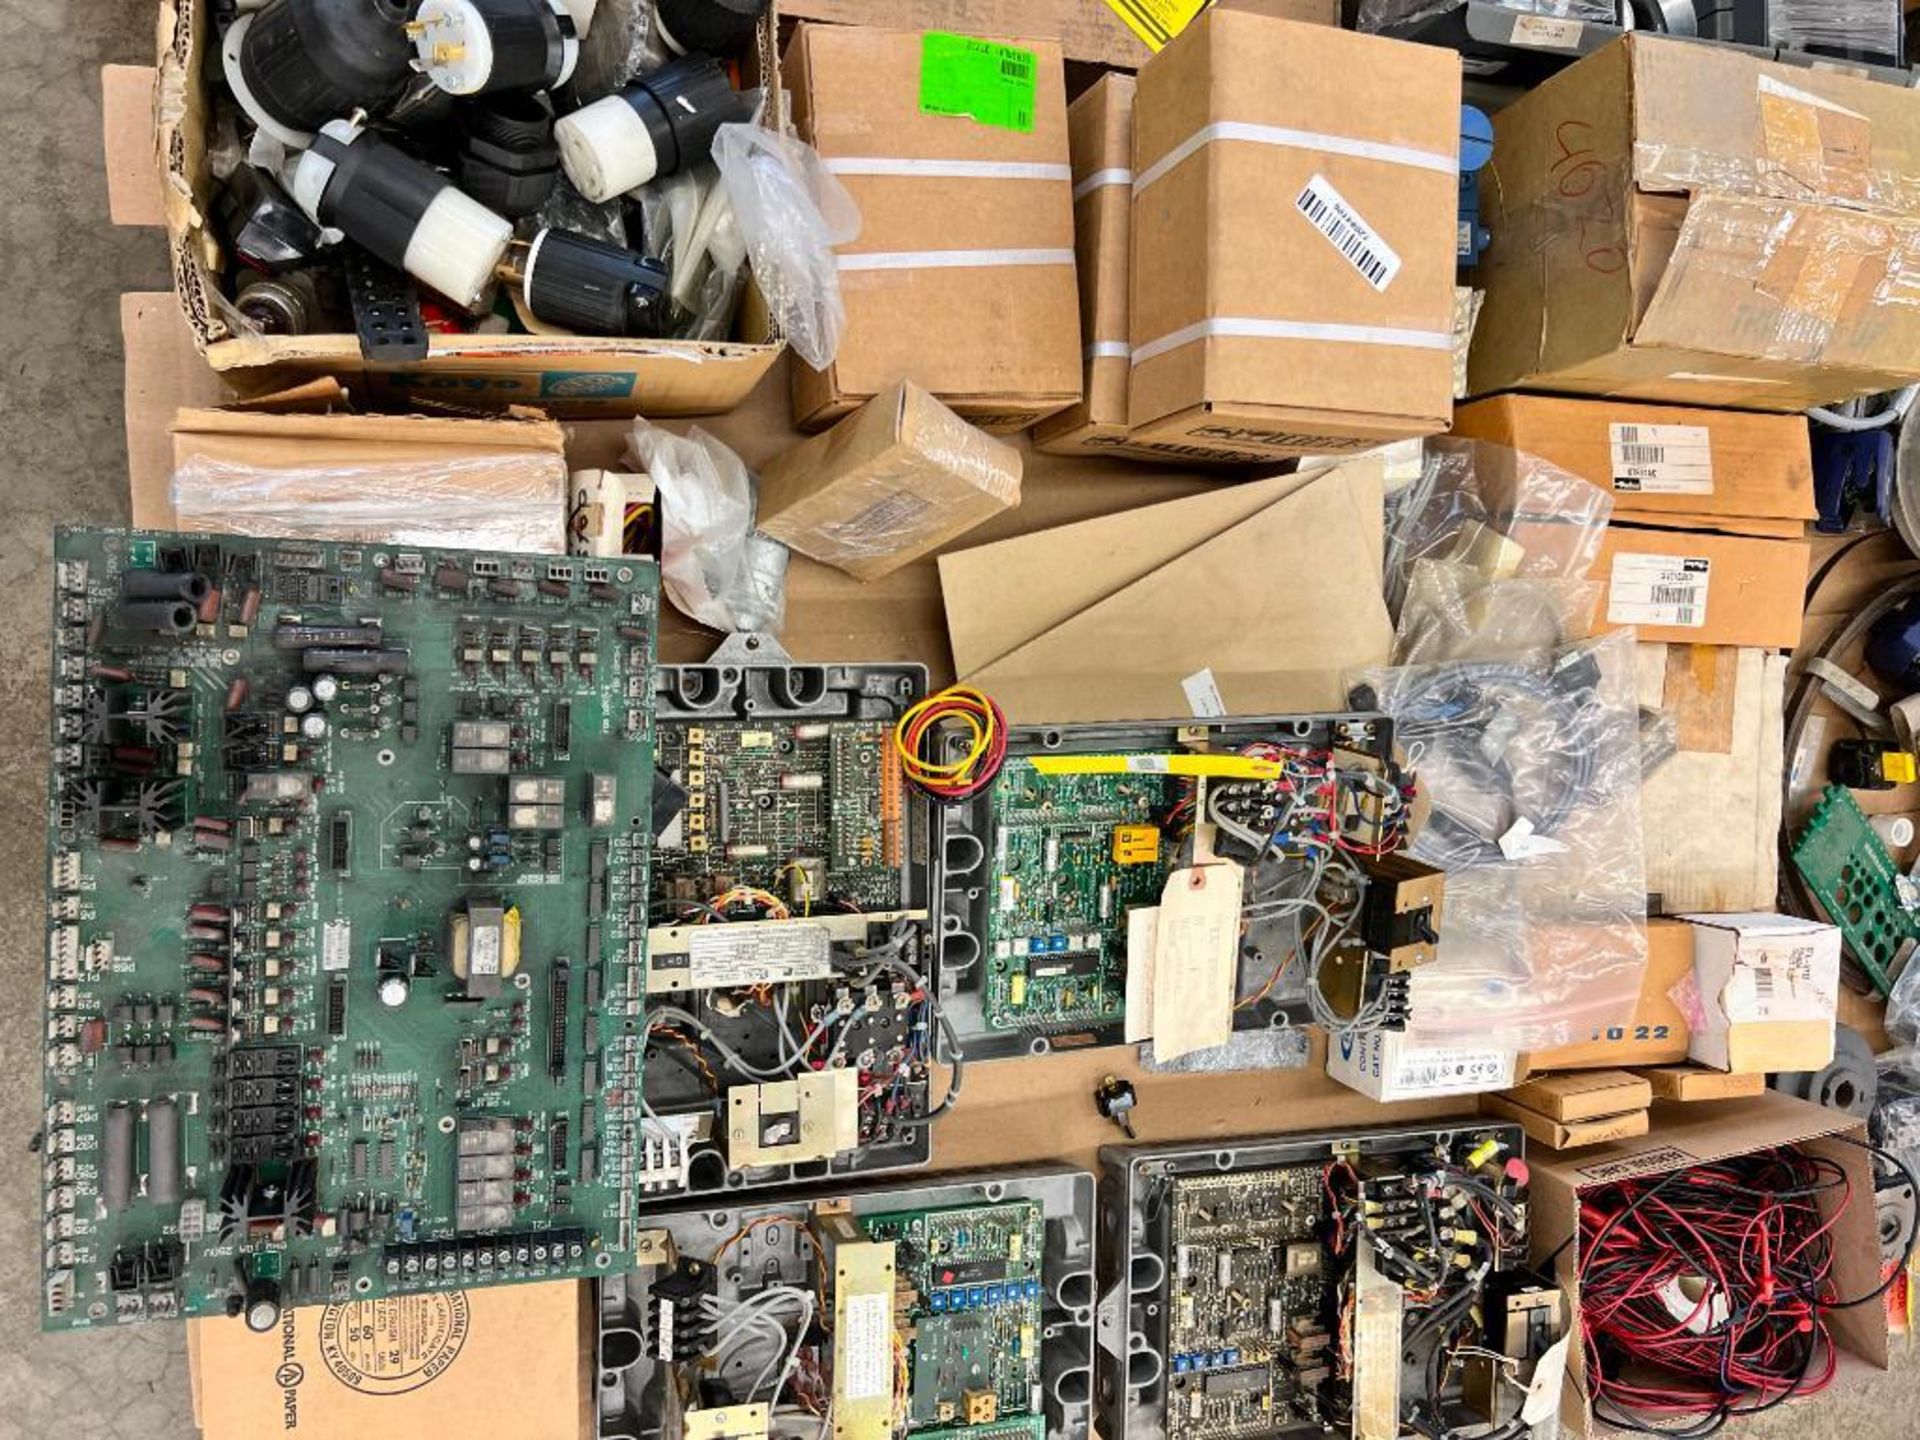 SKID OF ASSORTED MOTHER BOARDS, ELECTRICAL PLUGS, CONTROL SWITCHES, & OTHER ELECTRICAL COMPONENTS